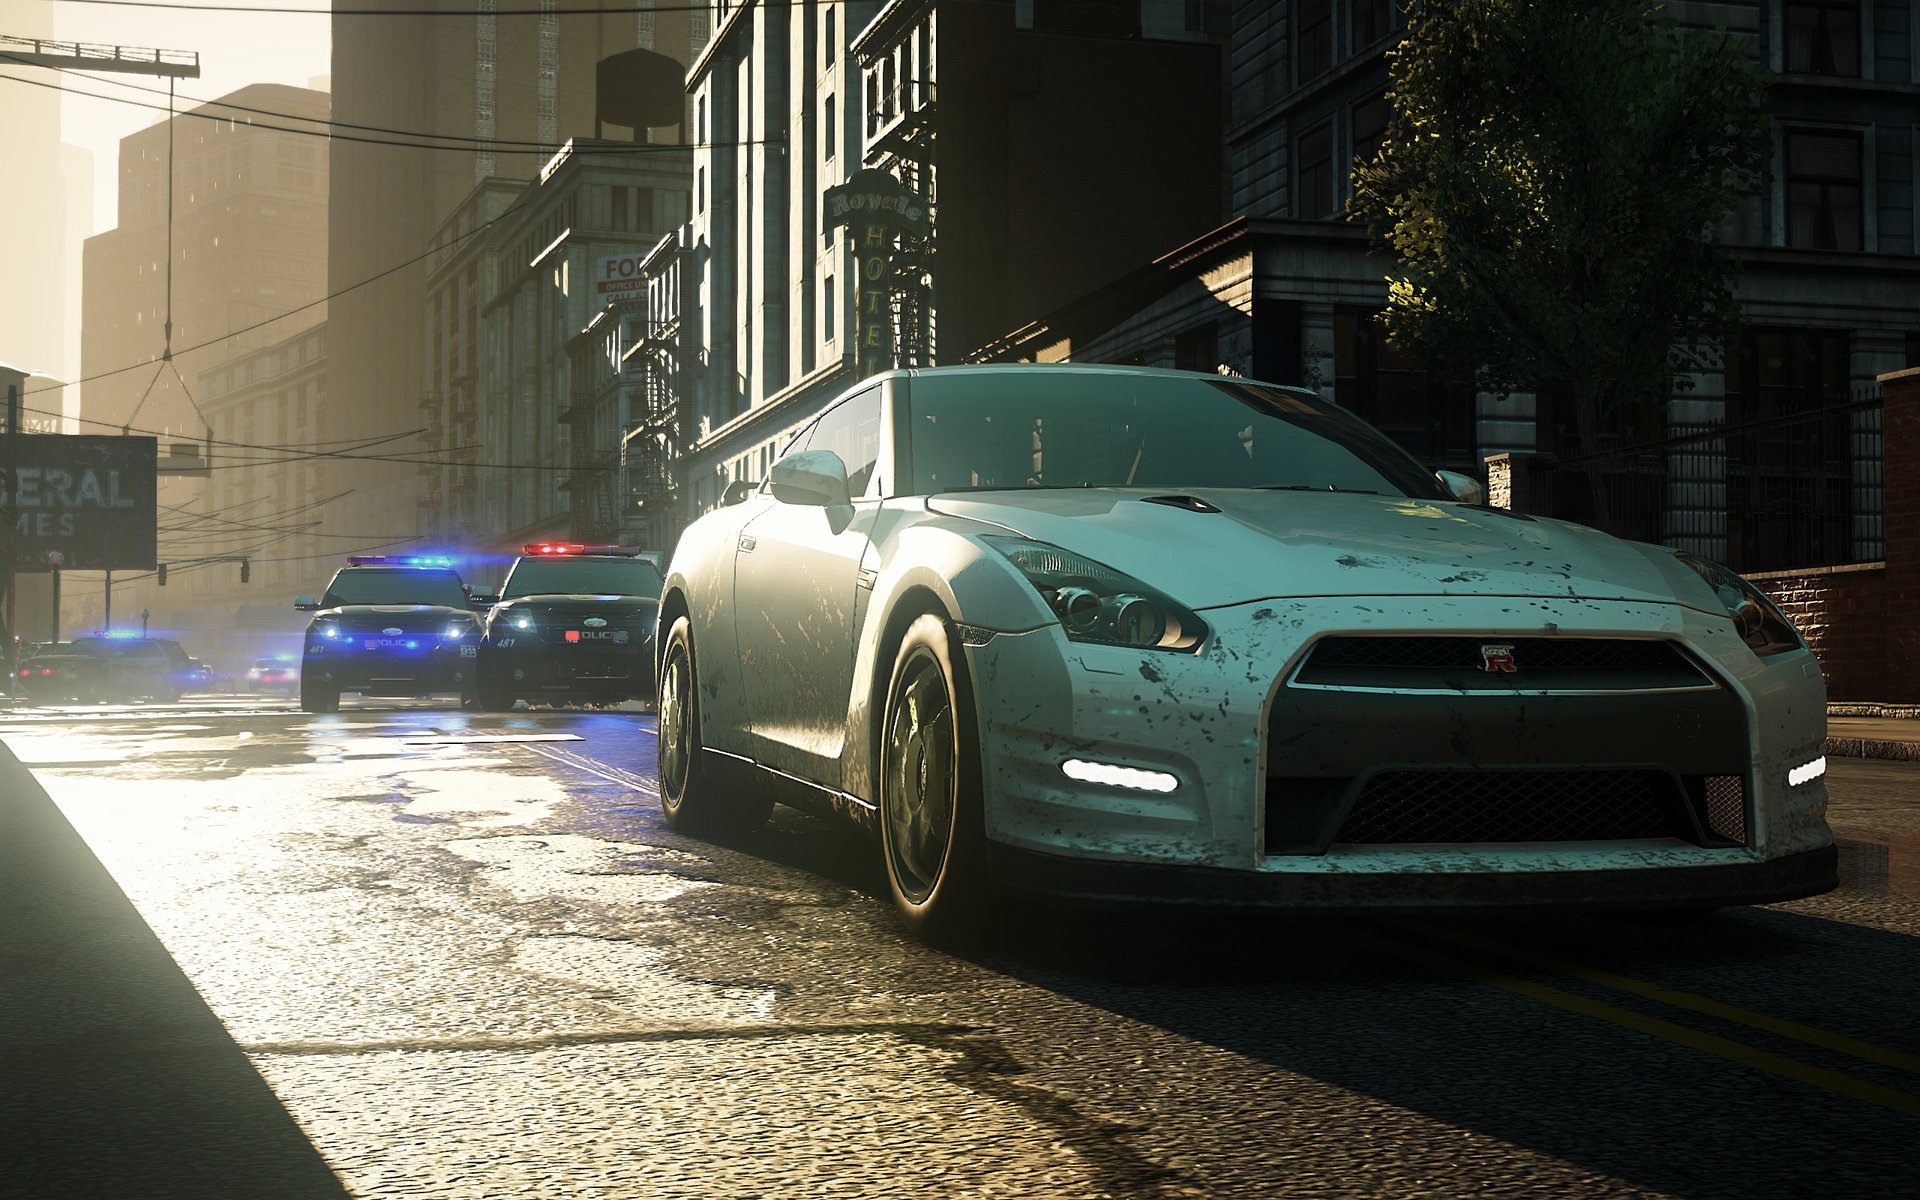 Need for Speed: Most Wanted 极品飞车17：最高通缉 高清壁纸20 - 1920x1200